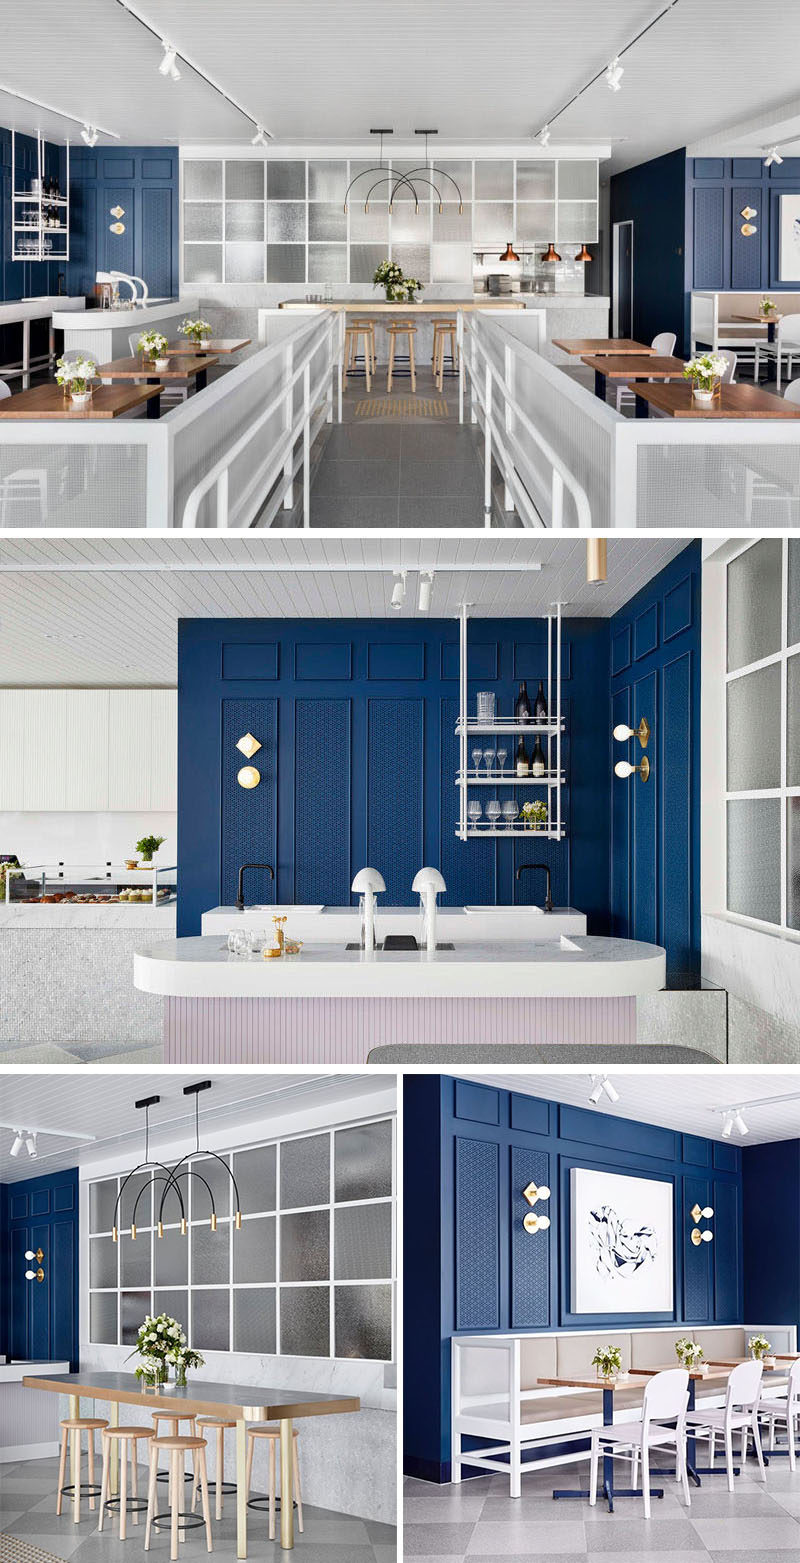 This contemporary coffee shop features royal blue walls with white and light pink accents.